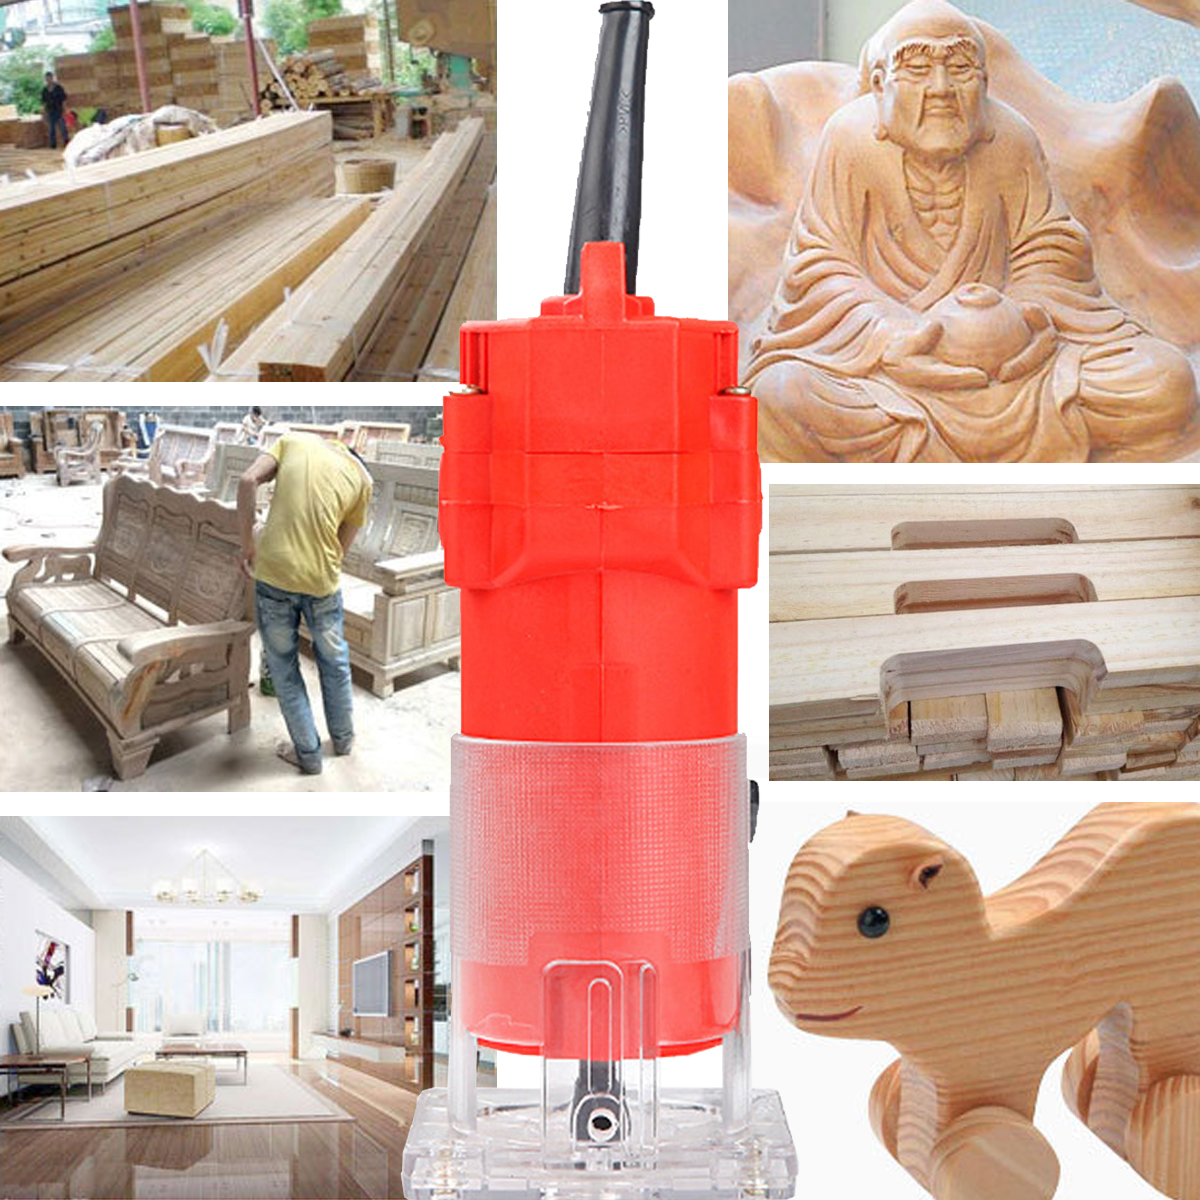 110V220V-2300W-Electric-Hand-Trimmer-Router-Wood-Laminate-Palm-Joiners-Working-Cutting-Machine-1735596-2